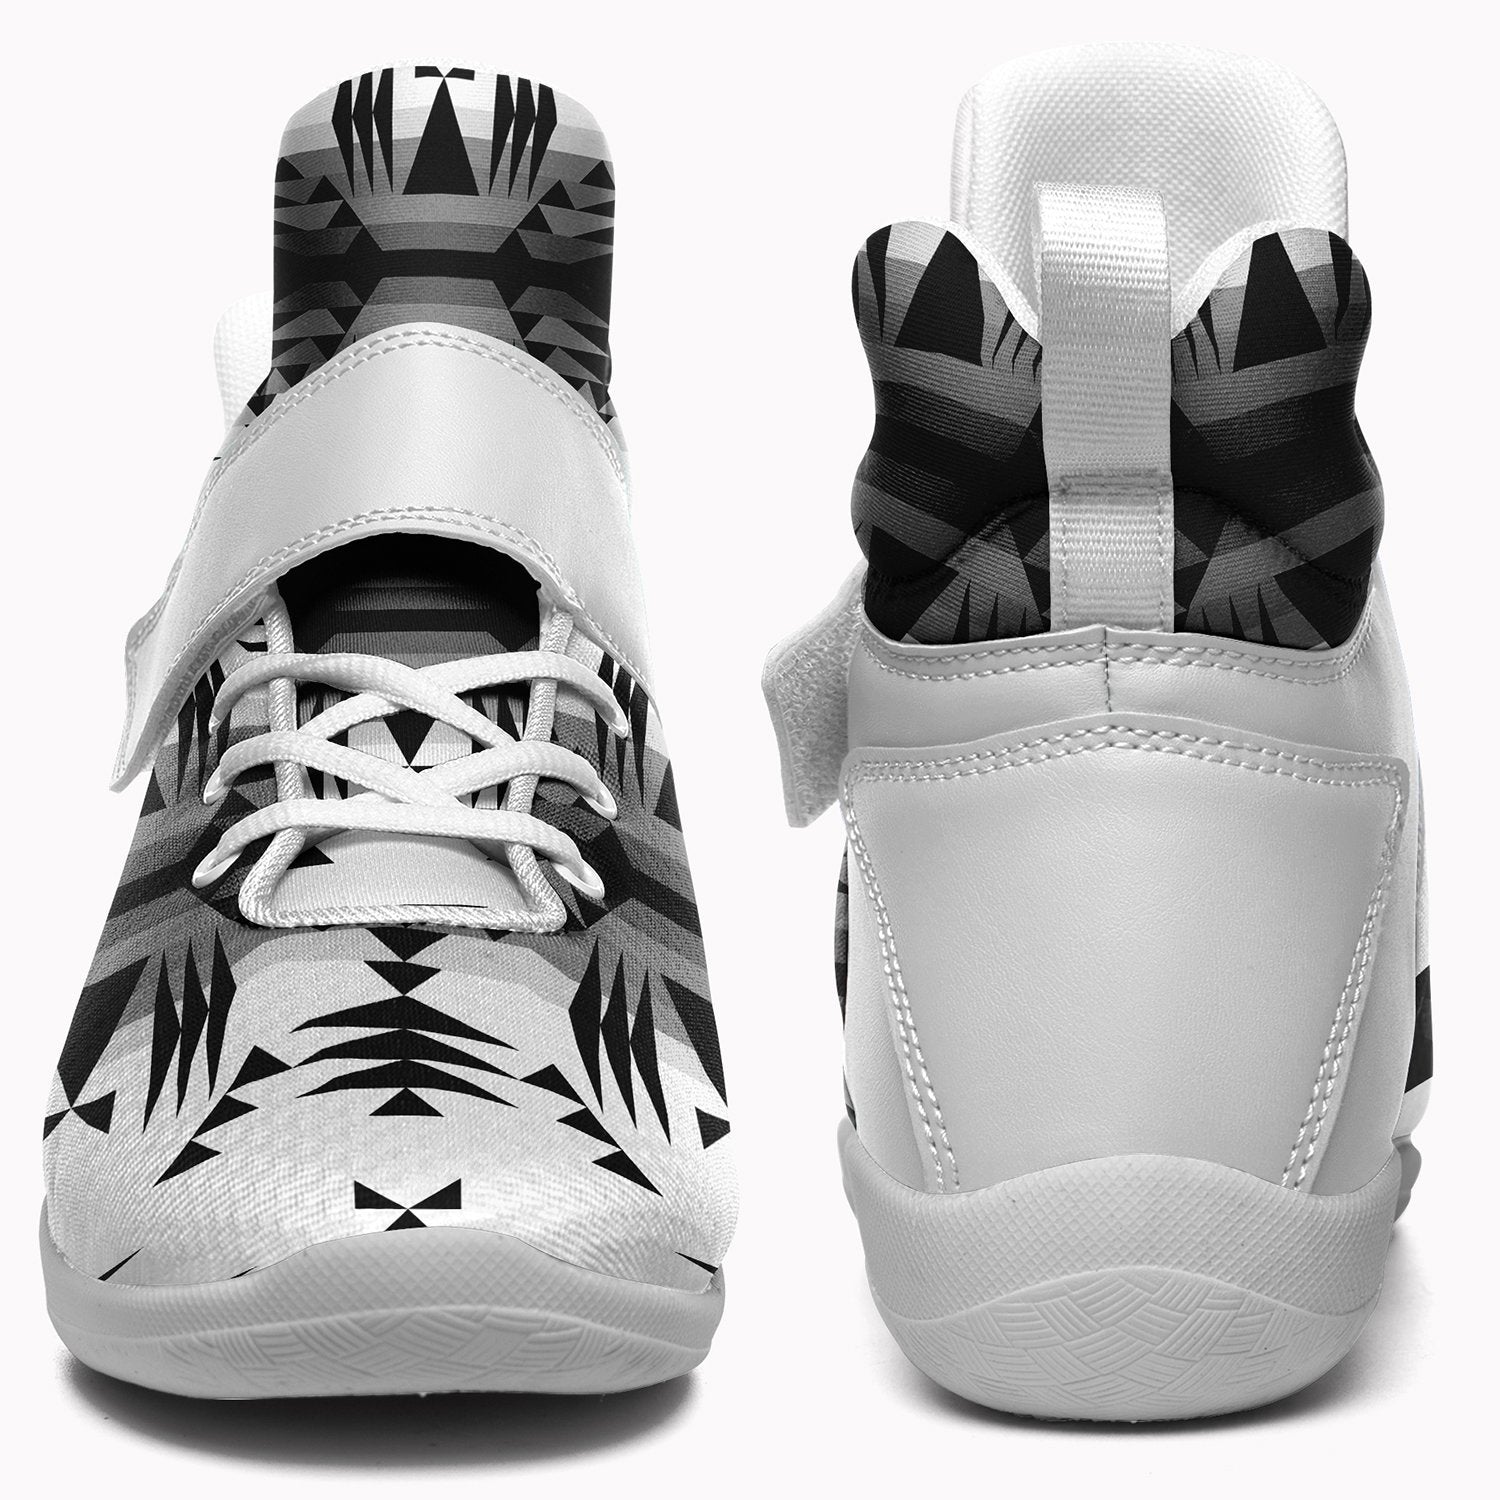 Between the Mountains White and Black Ipottaa Basketball / Sport High Top Shoes - White Sole 49 Dzine 